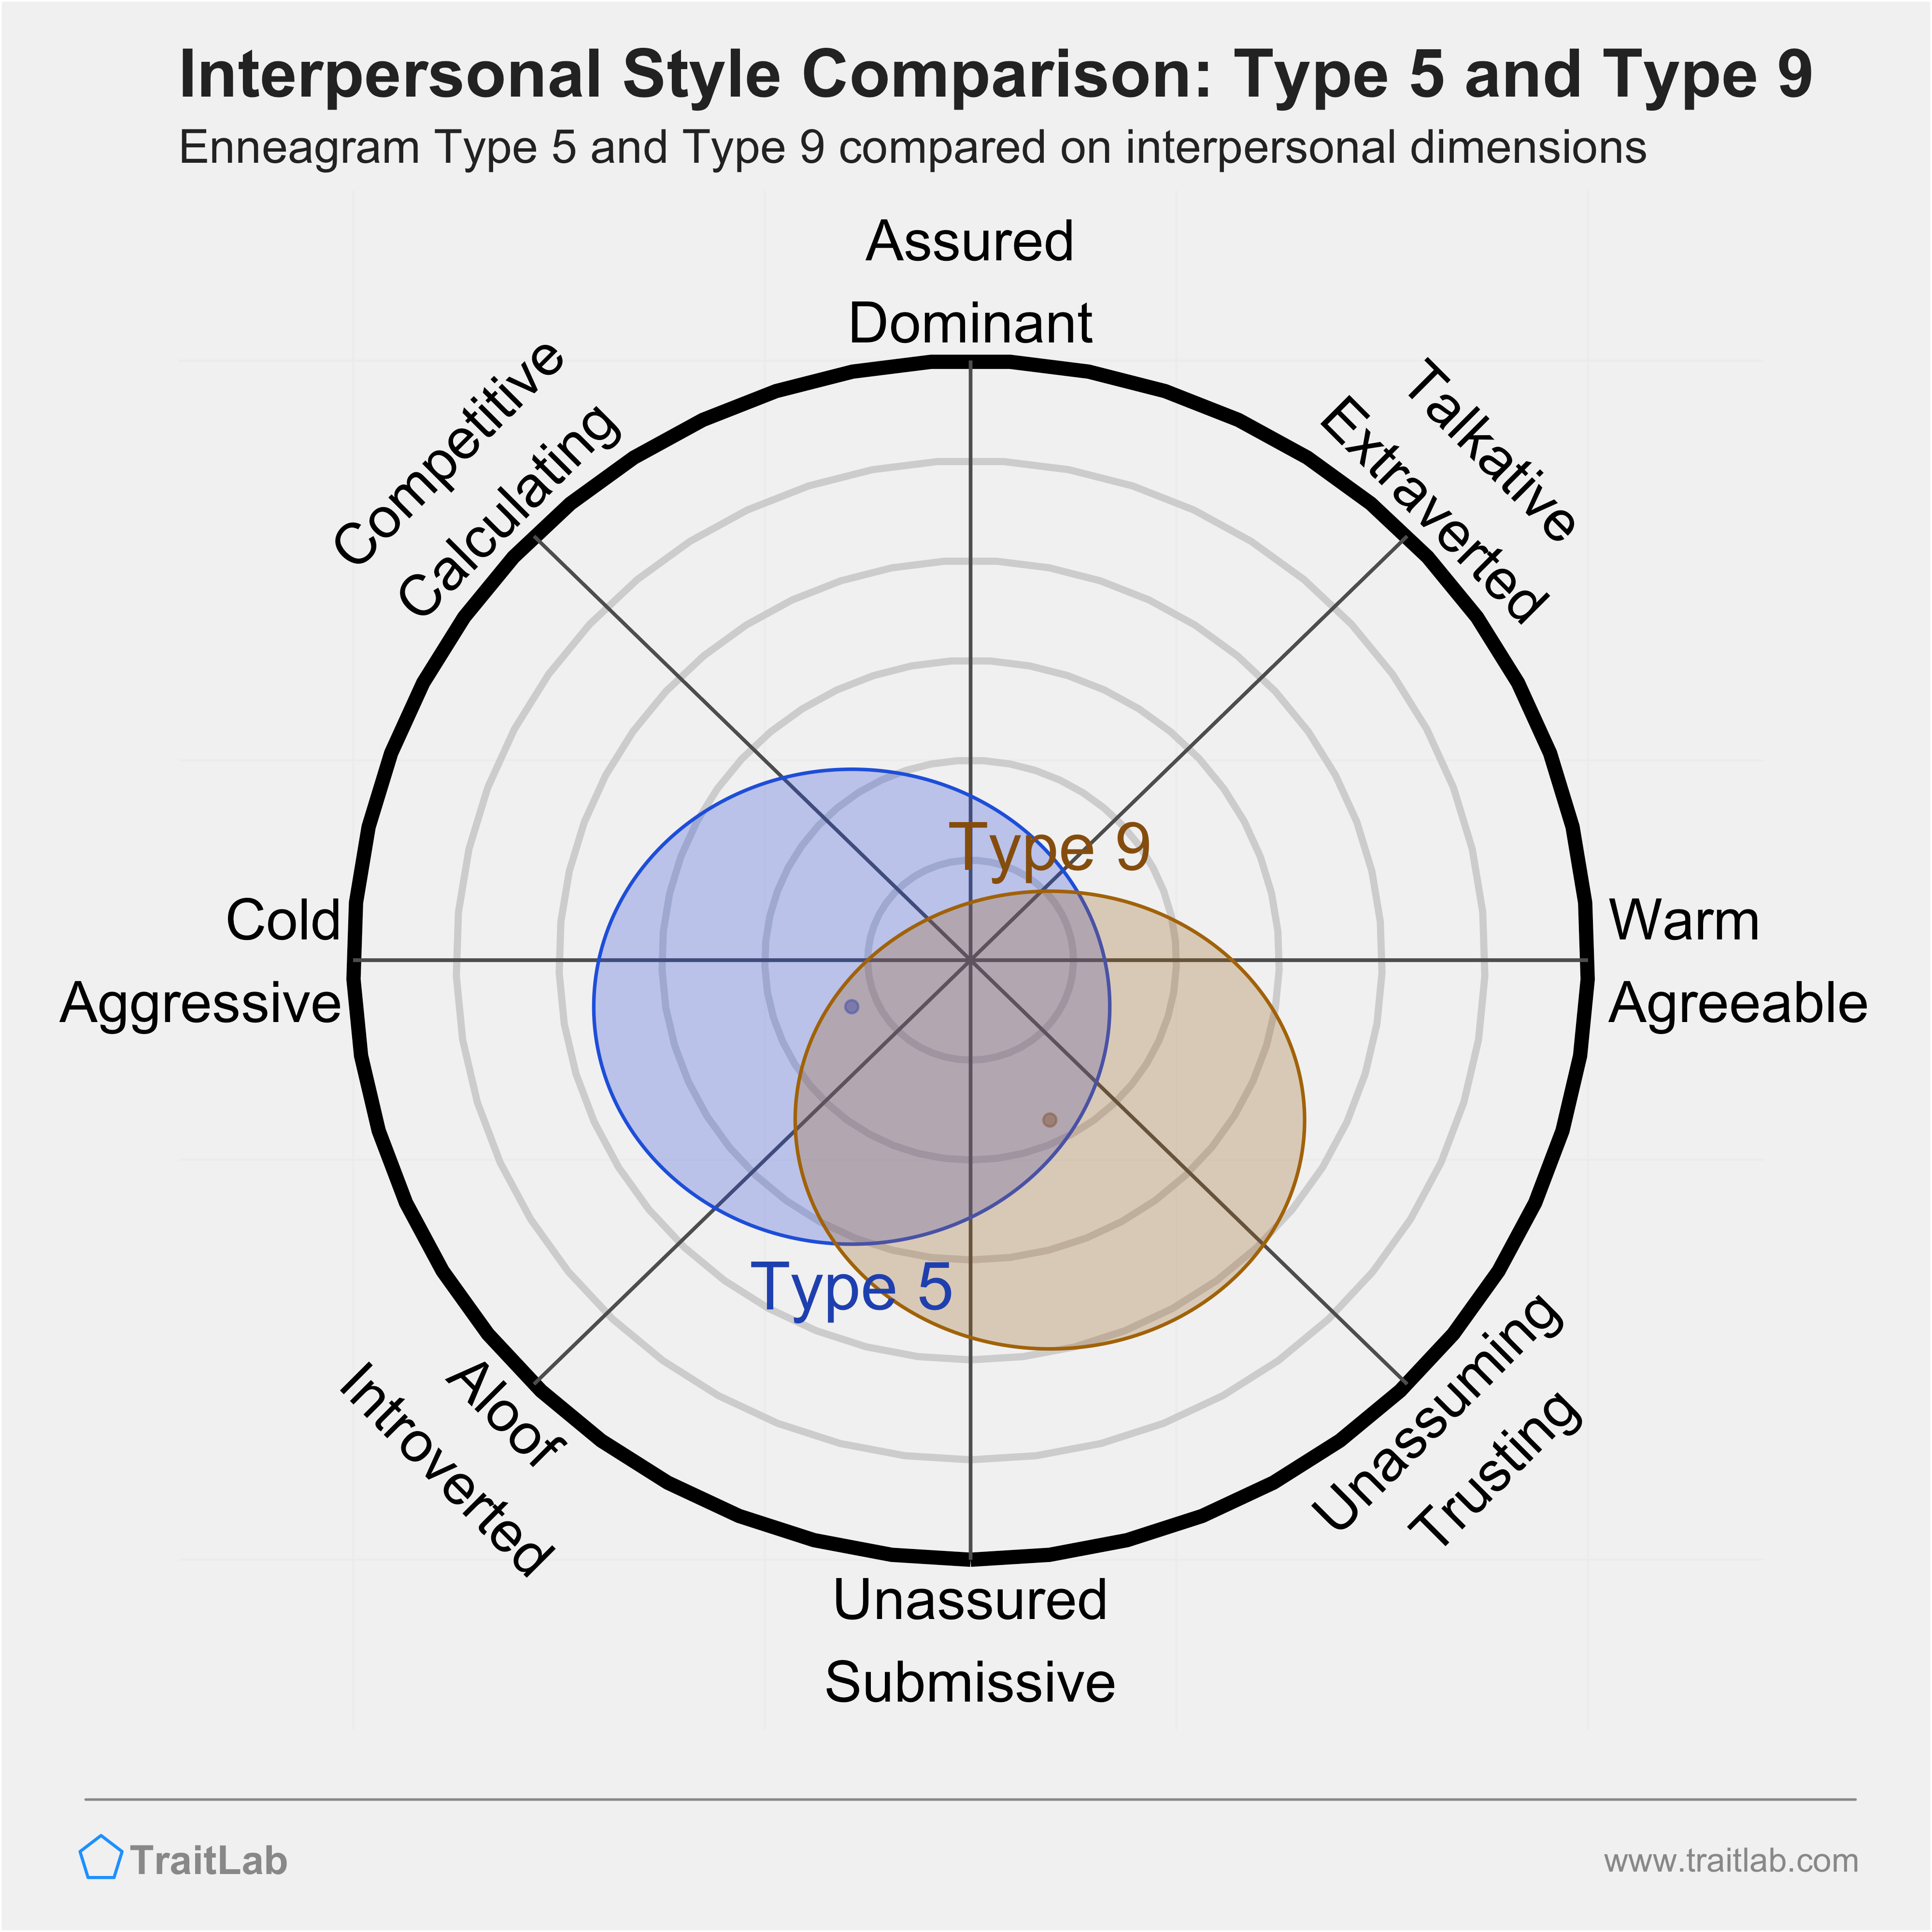 Enneagram Type 5 and Type 9 comparison across interpersonal dimensions